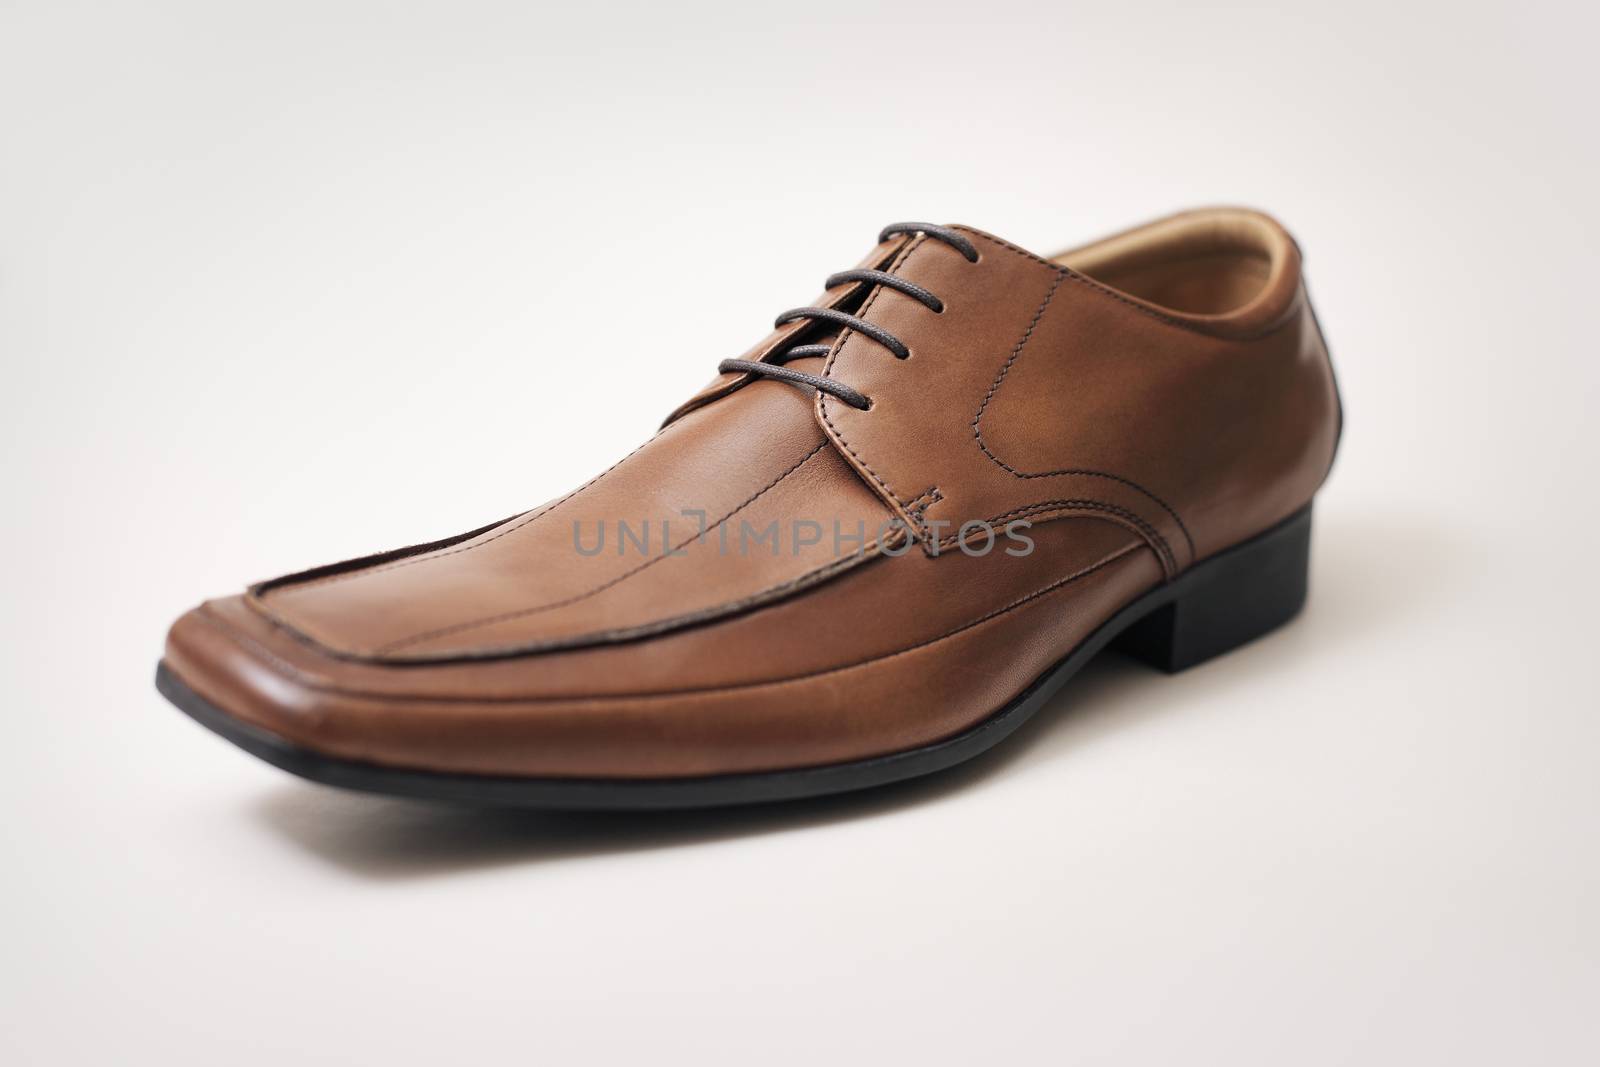 Men's brown leather shoe on light brown background. Very short depth-of-field.